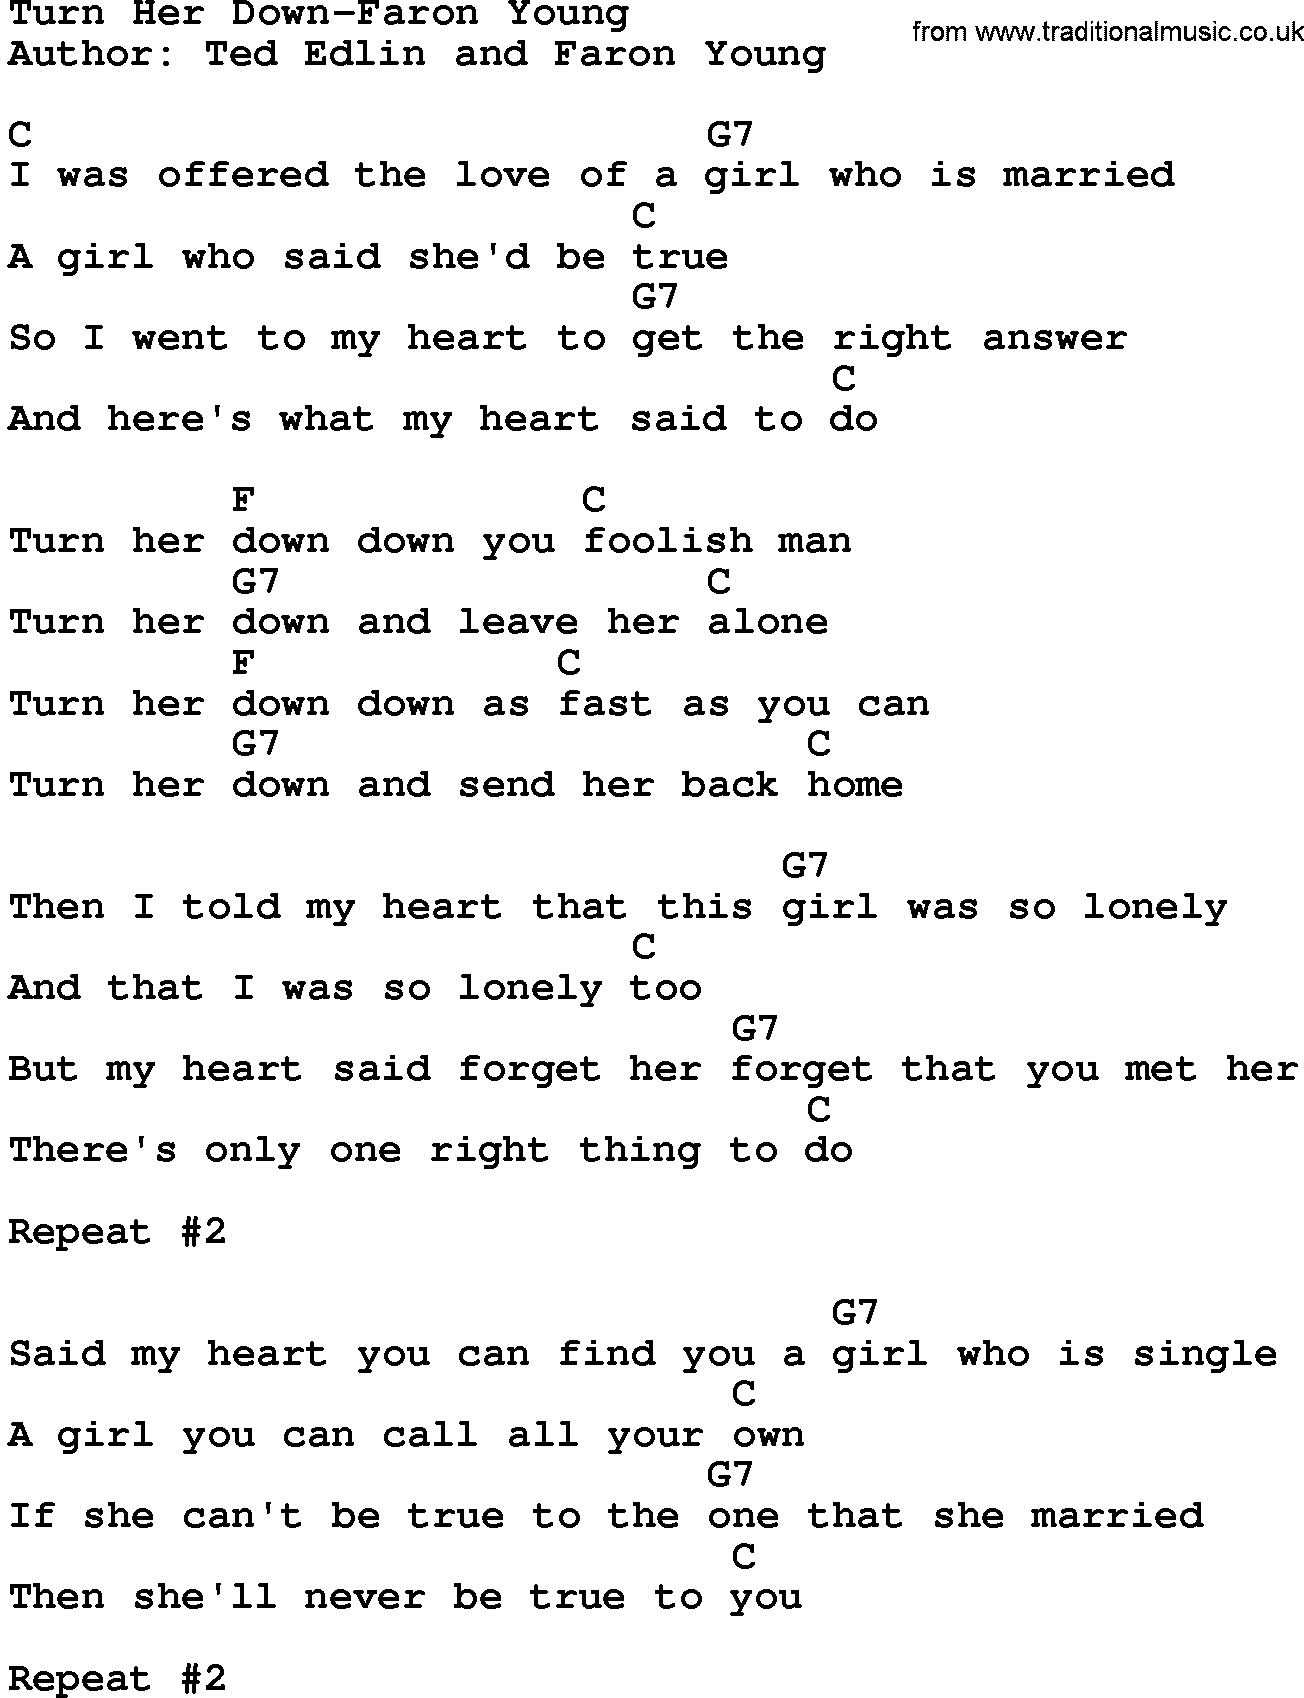 Country music song: Turn Her Down-Faron Young lyrics and chords